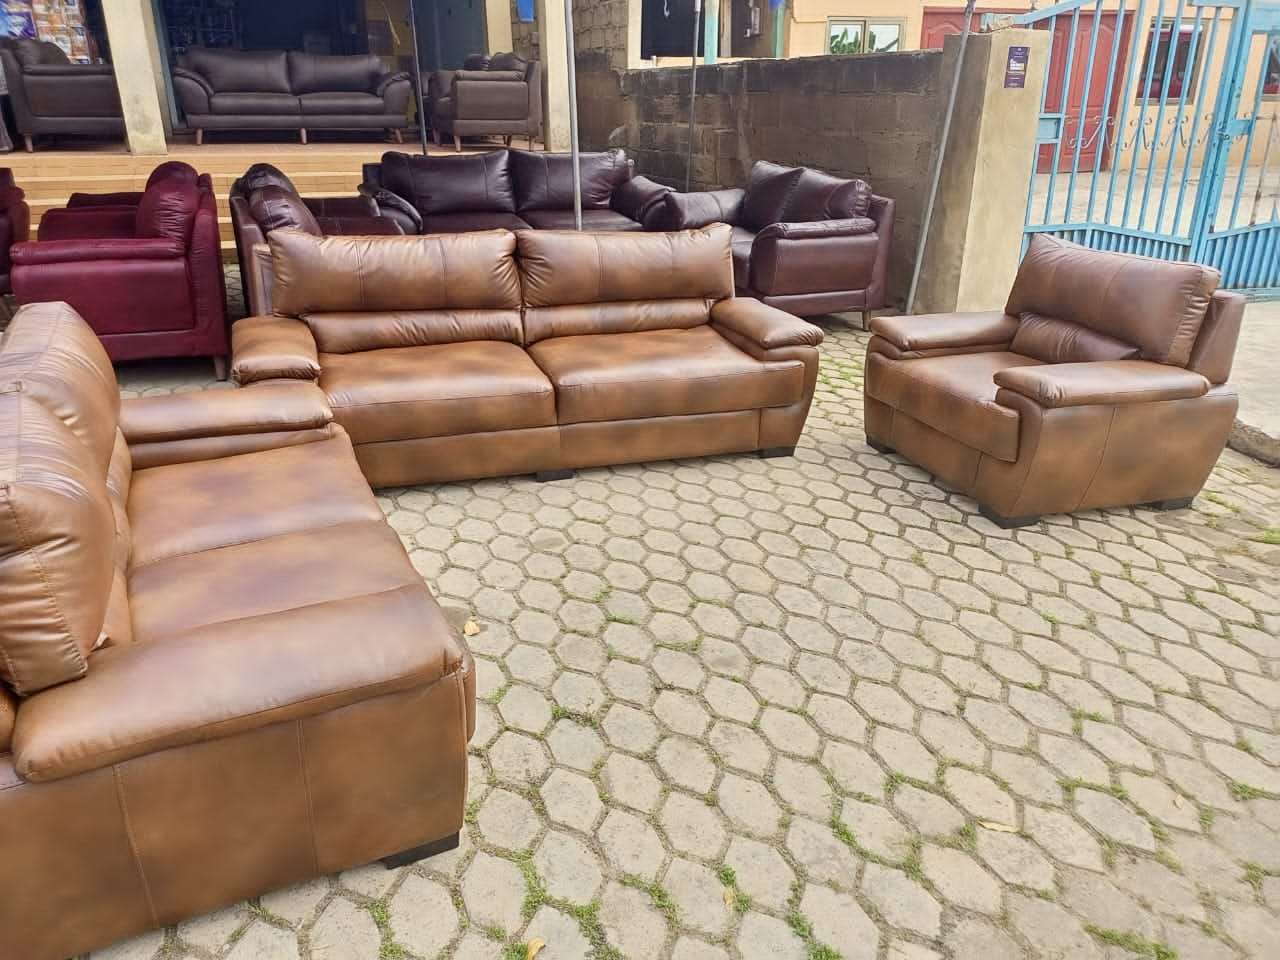 Set of turkey couch